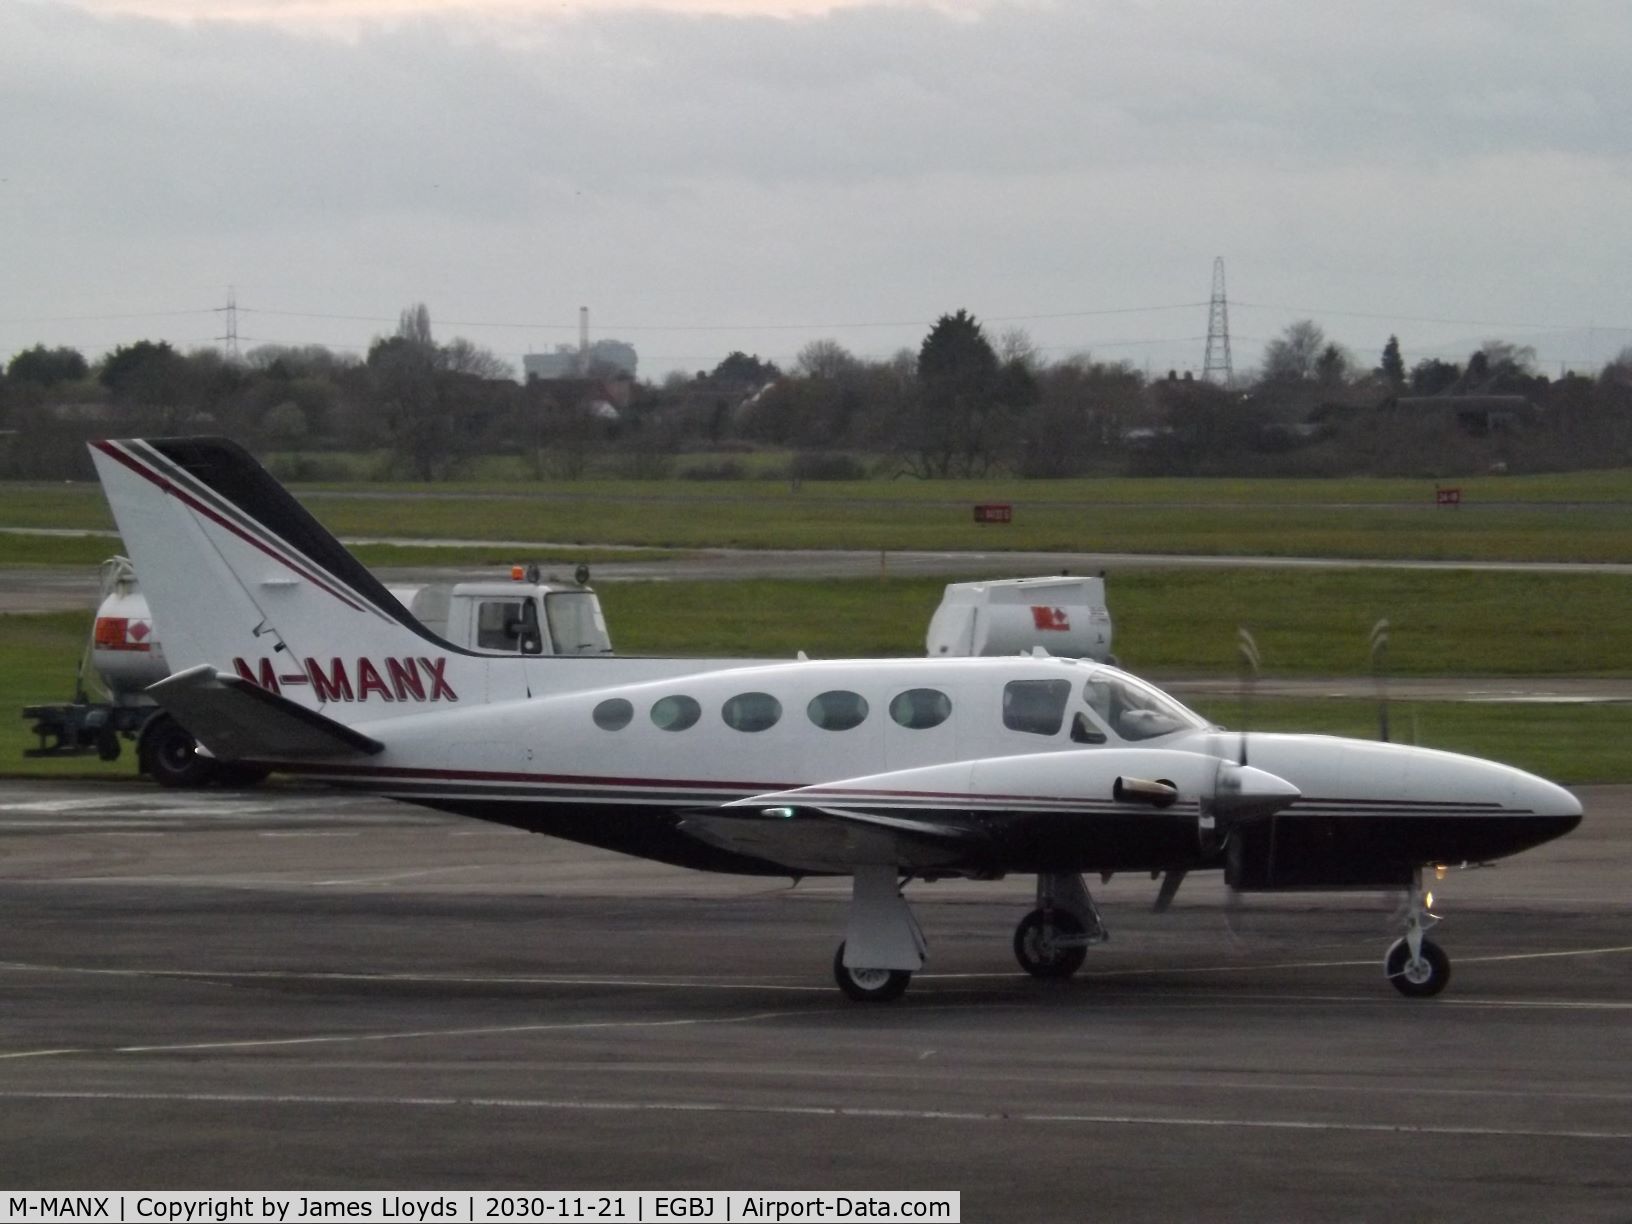 M-MANX, 1981 Cessna 425 Conquest I C/N 425-0044, At Gloucestershire Airport.